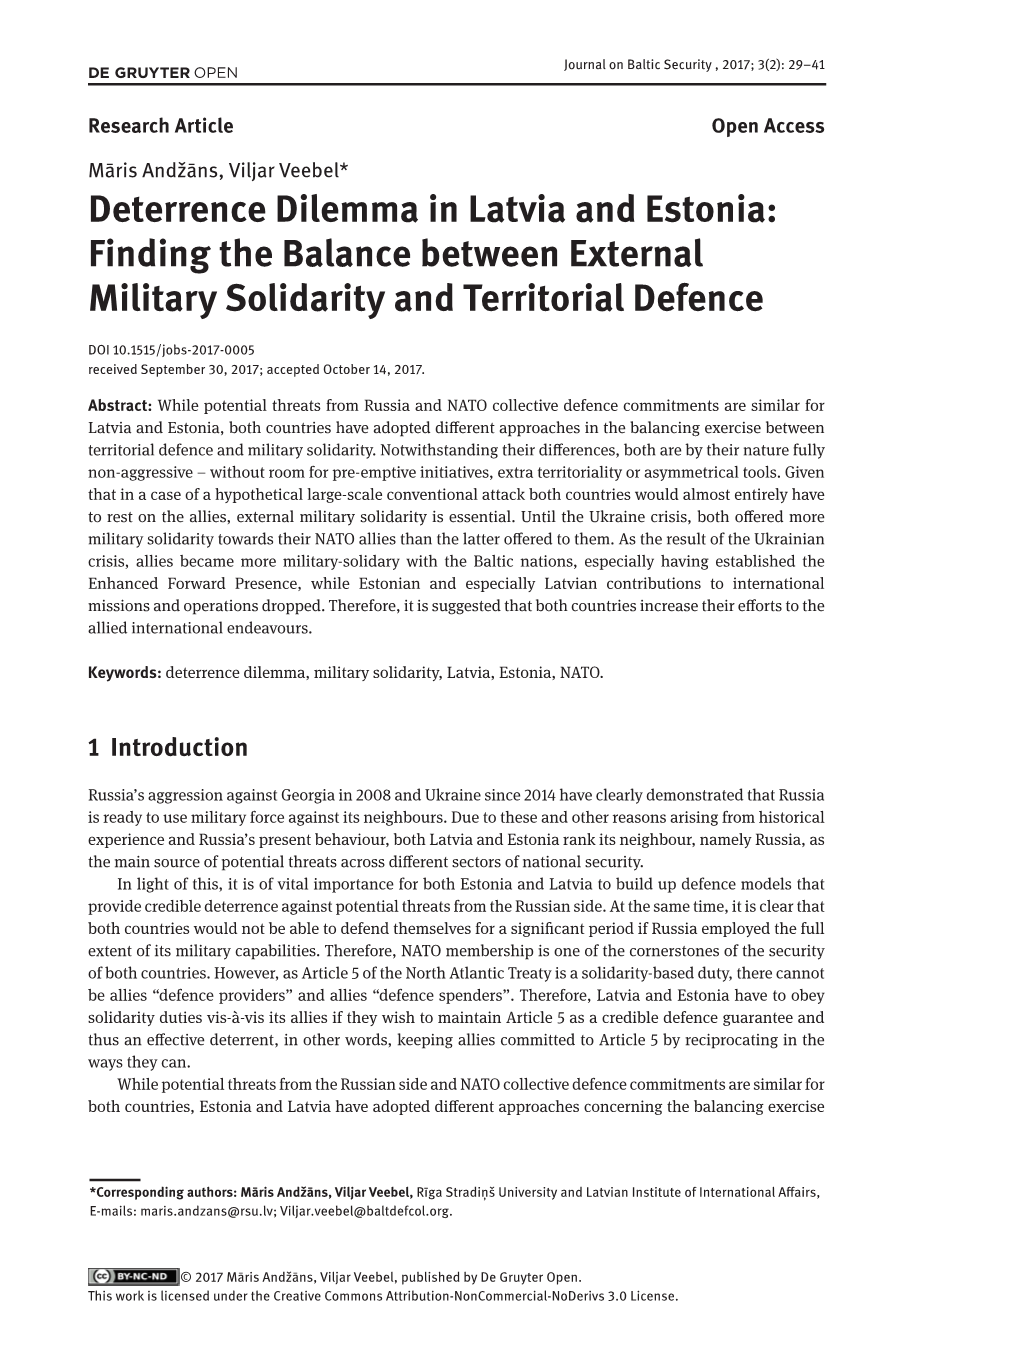 Deterrence Dilemma in Latvia and Estonia: Finding the Balance Between External Military Solidarity and Territorial Defence